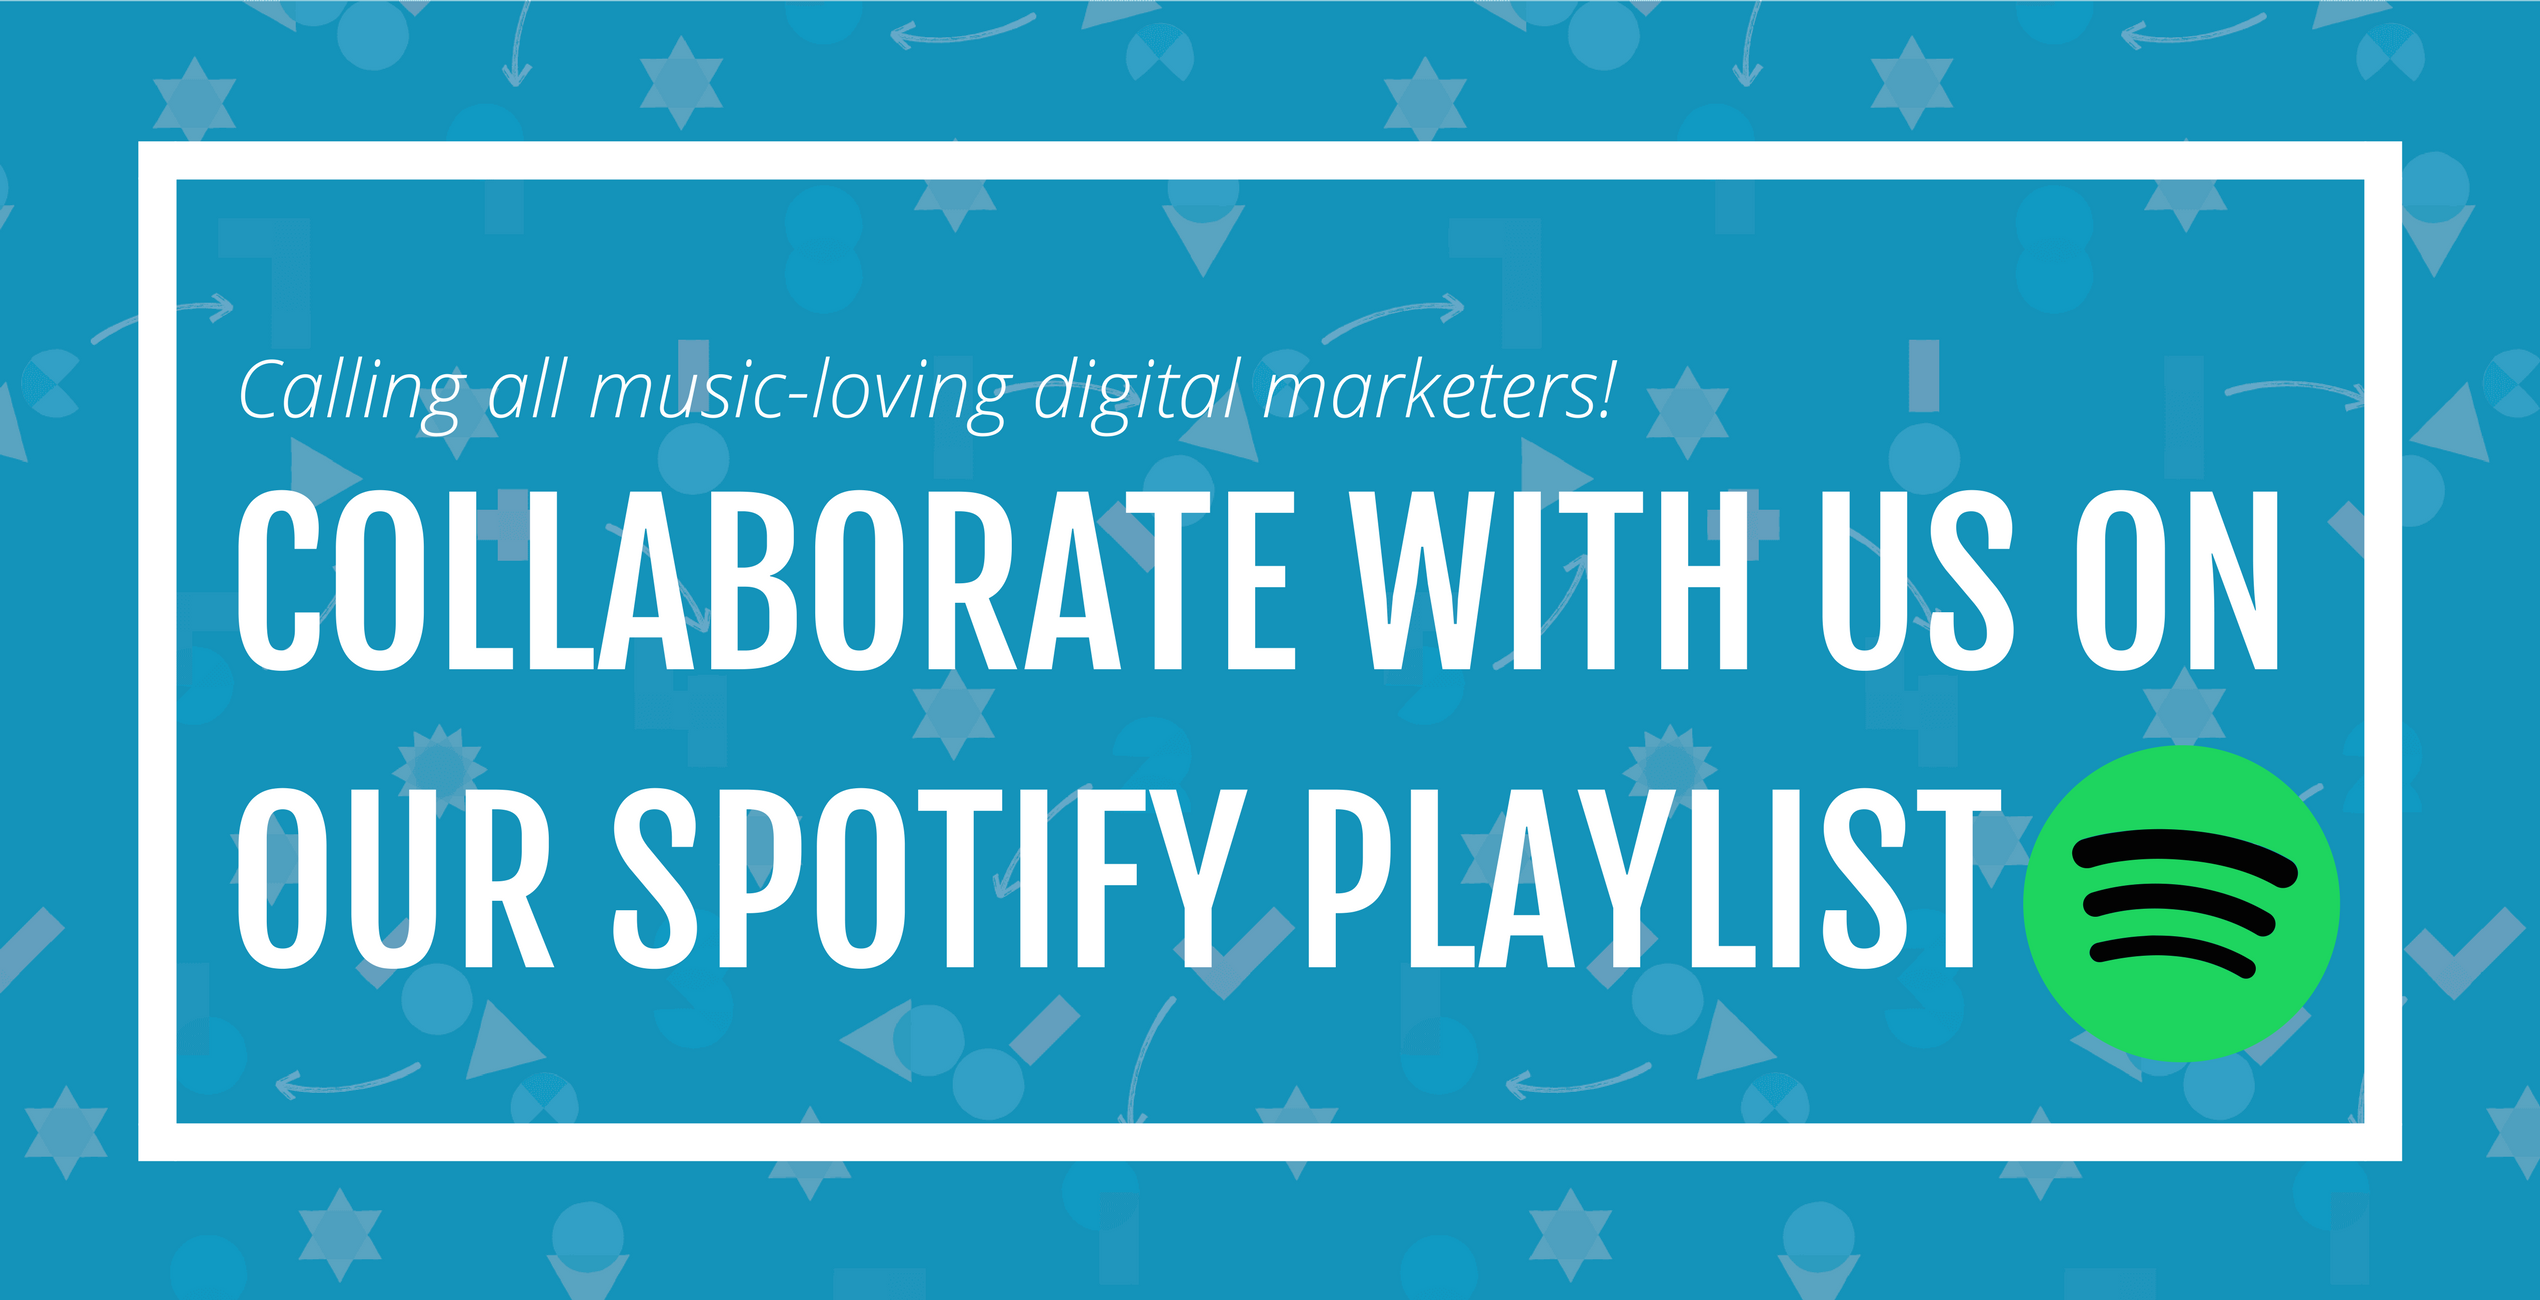 Calling all music-loving digital marketers! Collaborate with us on our Spotify playlist.